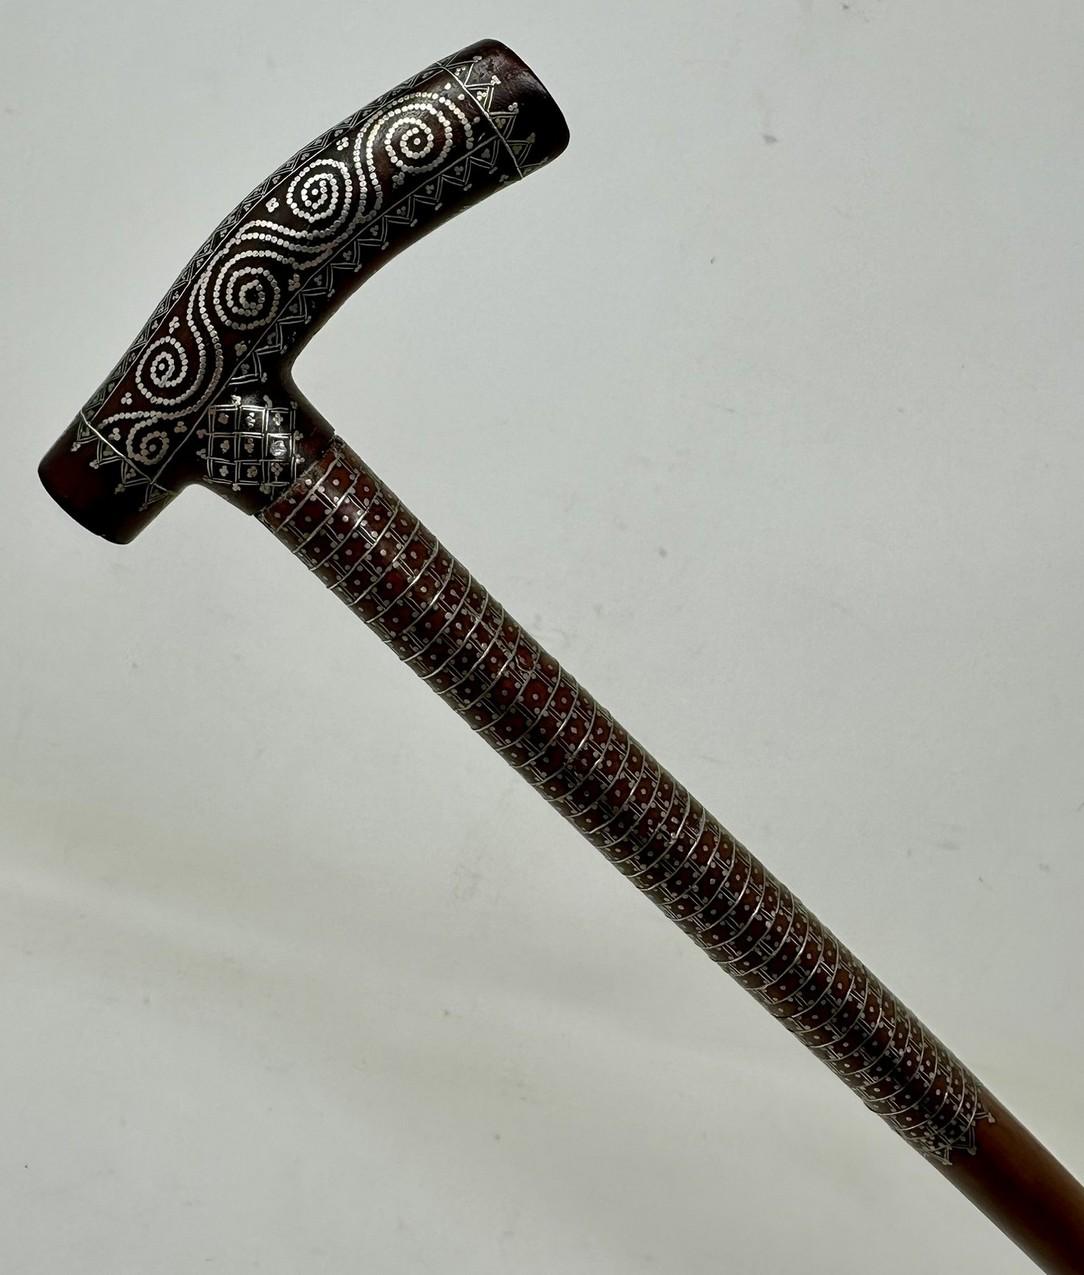 Antique Ladys Sterling Silver Claute Pique Malacca Tau Handle Walking Stick Cane In Good Condition For Sale In Dublin, Ireland